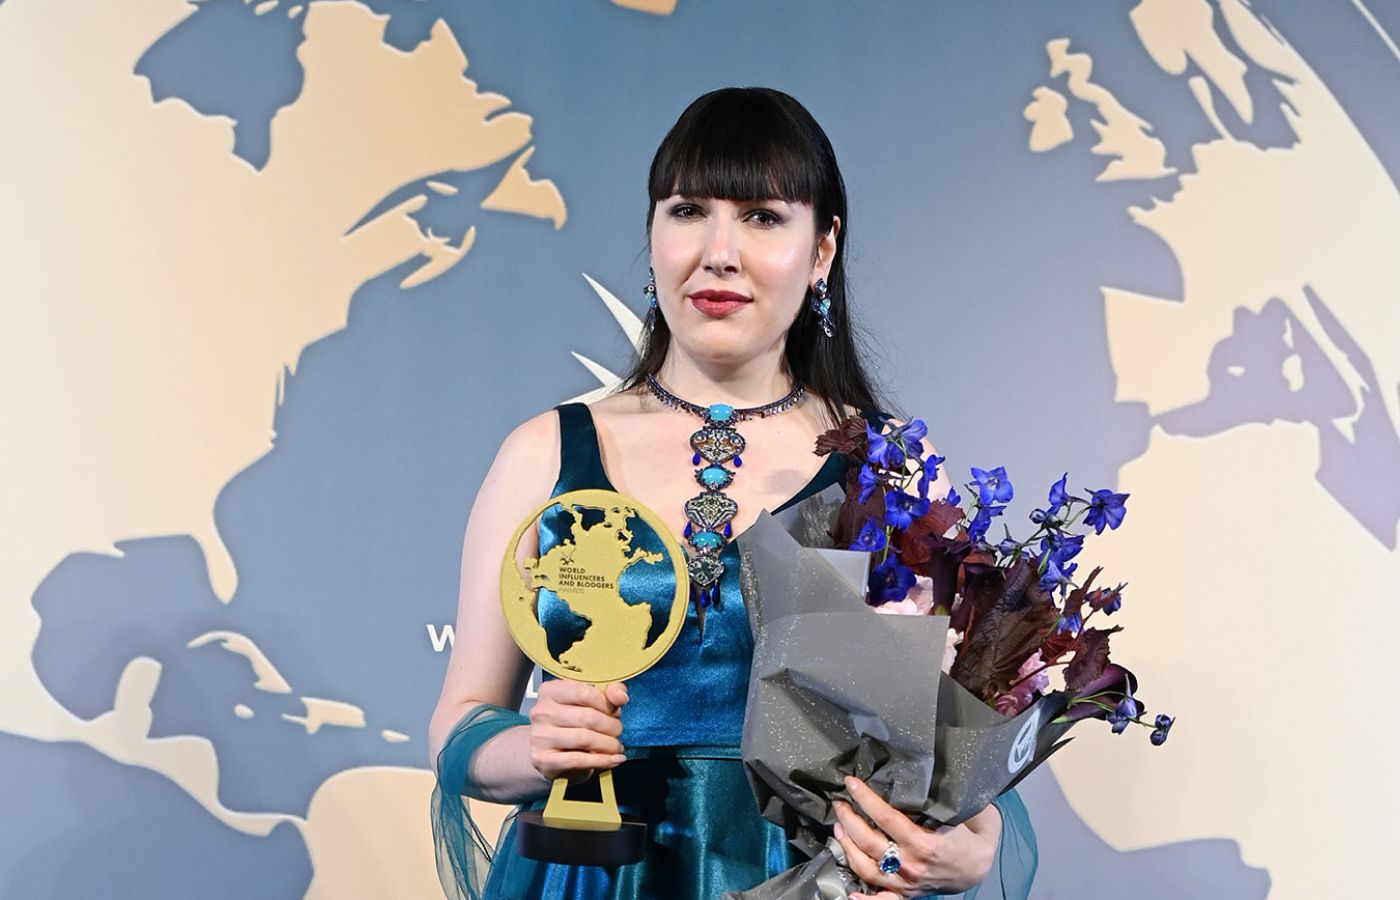 Myself receiving the WIBA Jewellery Influencer Award during the Cannes Film Festival 2021